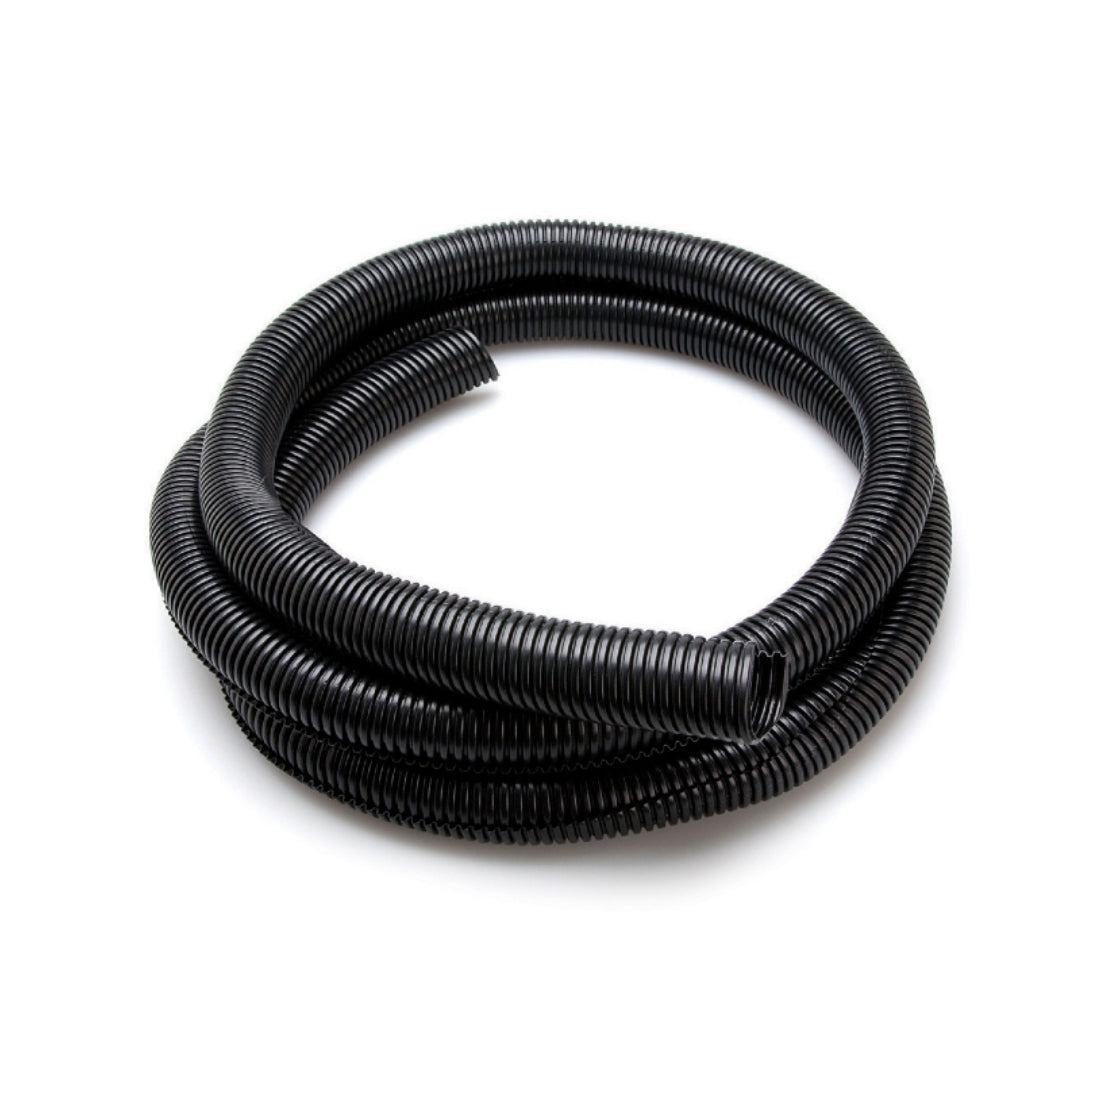 Hosa WHD-410 1in x 10ft Black Split Cable Organizer